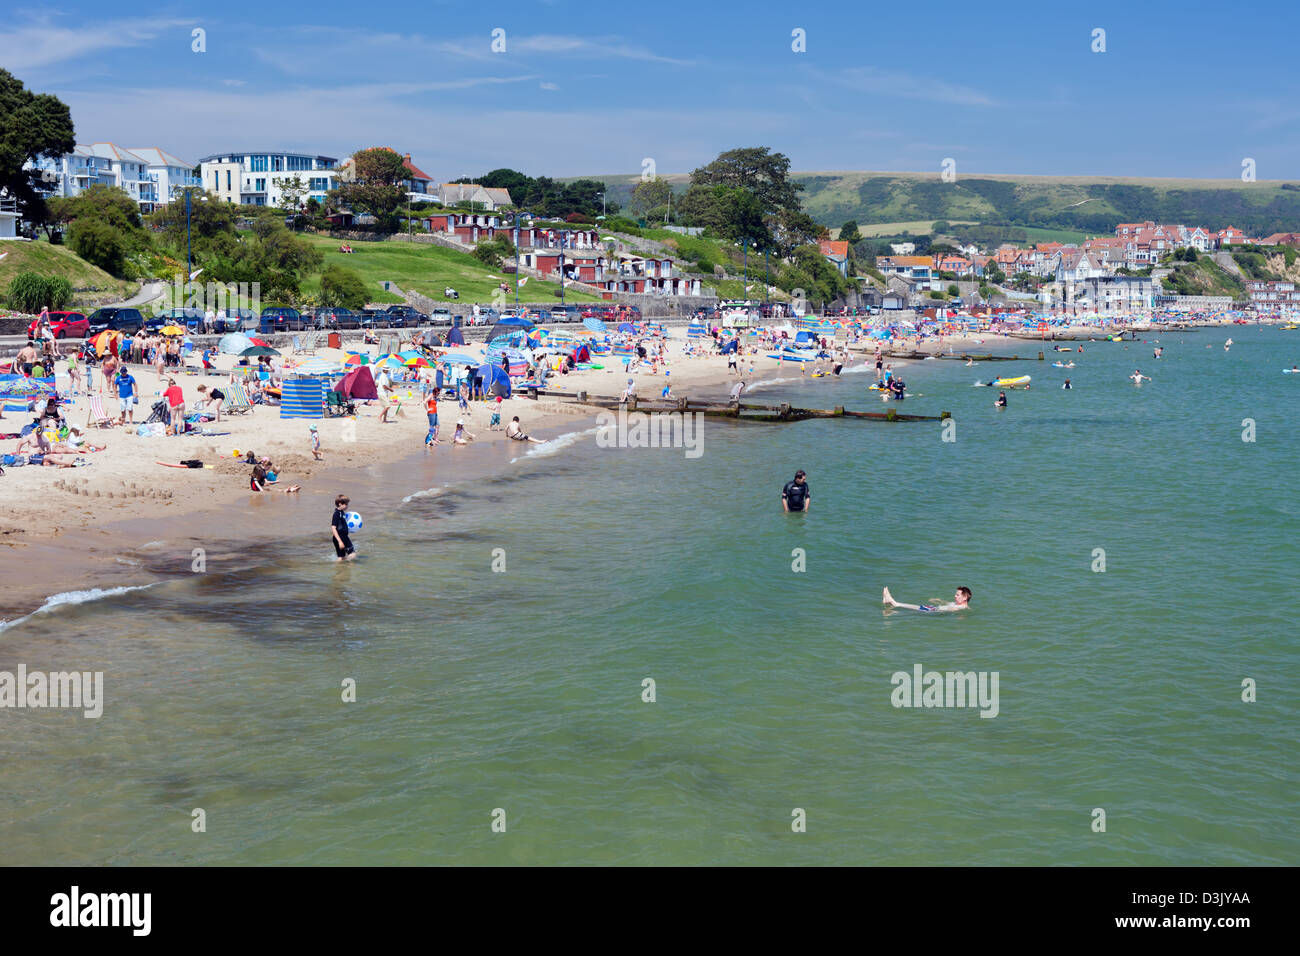 Summertime in Swanage. Stock Photo